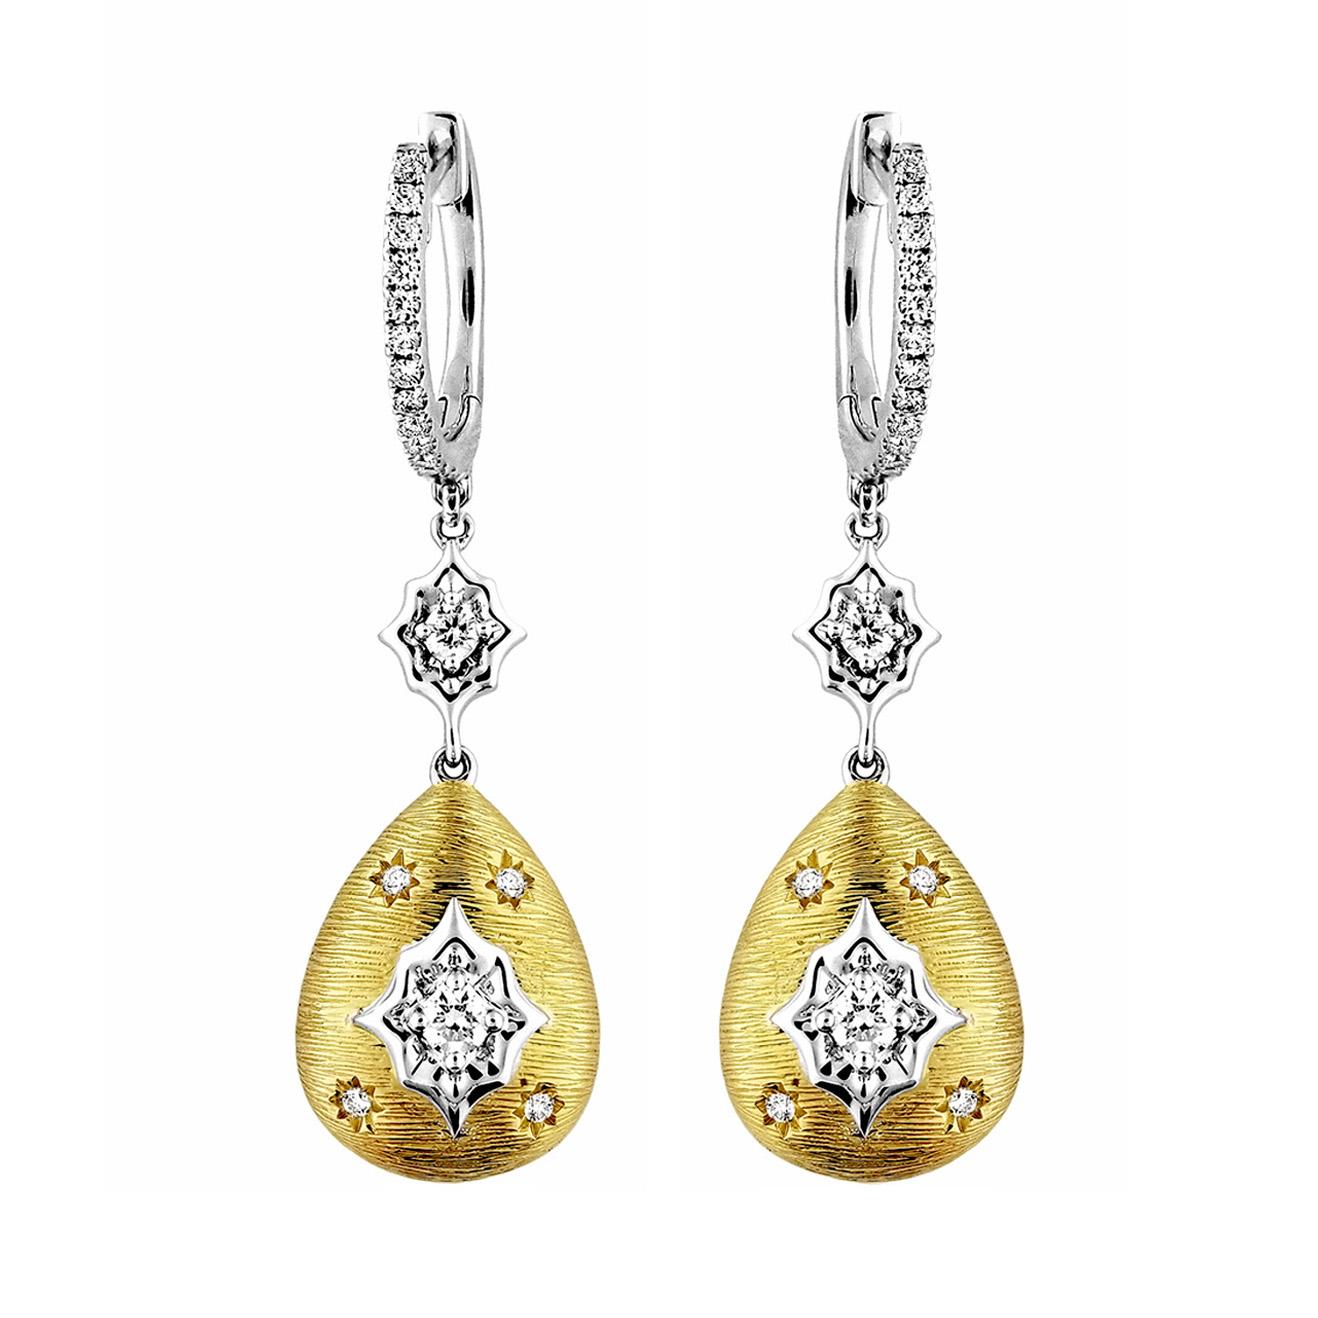 Produced by award winning Italian designer Stefano Vitolo. Stefano creates custom artisanal one of a kind jewelry with excellent gemstones in a truly old world Italian craftmanship.
These handcrafted earring have 0.35 total carat weight of F/G